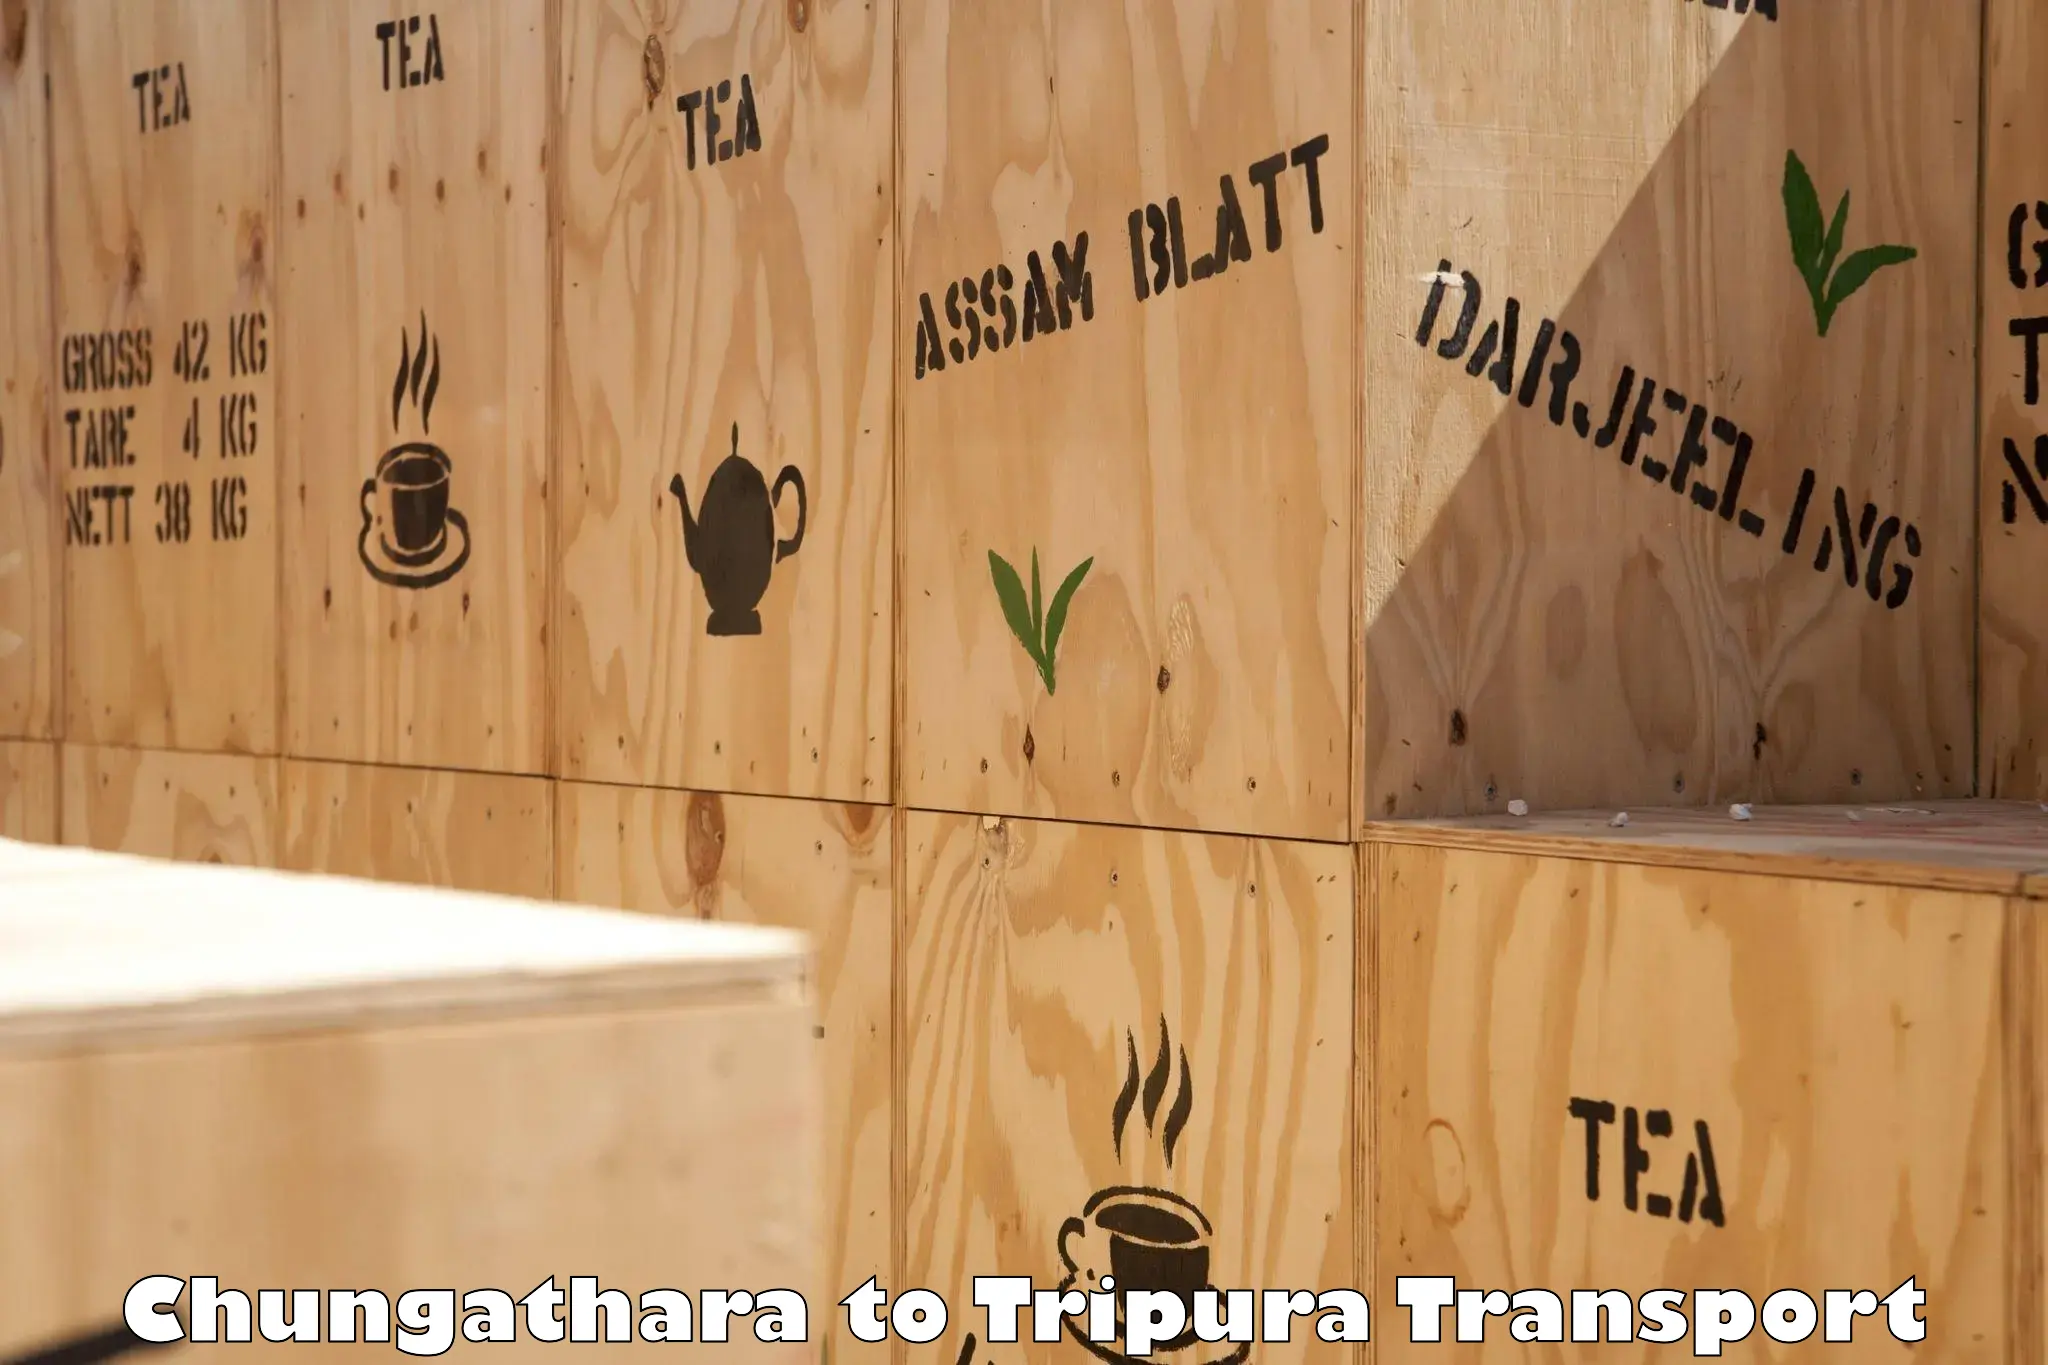 Cargo transportation services in Chungathara to North Tripura